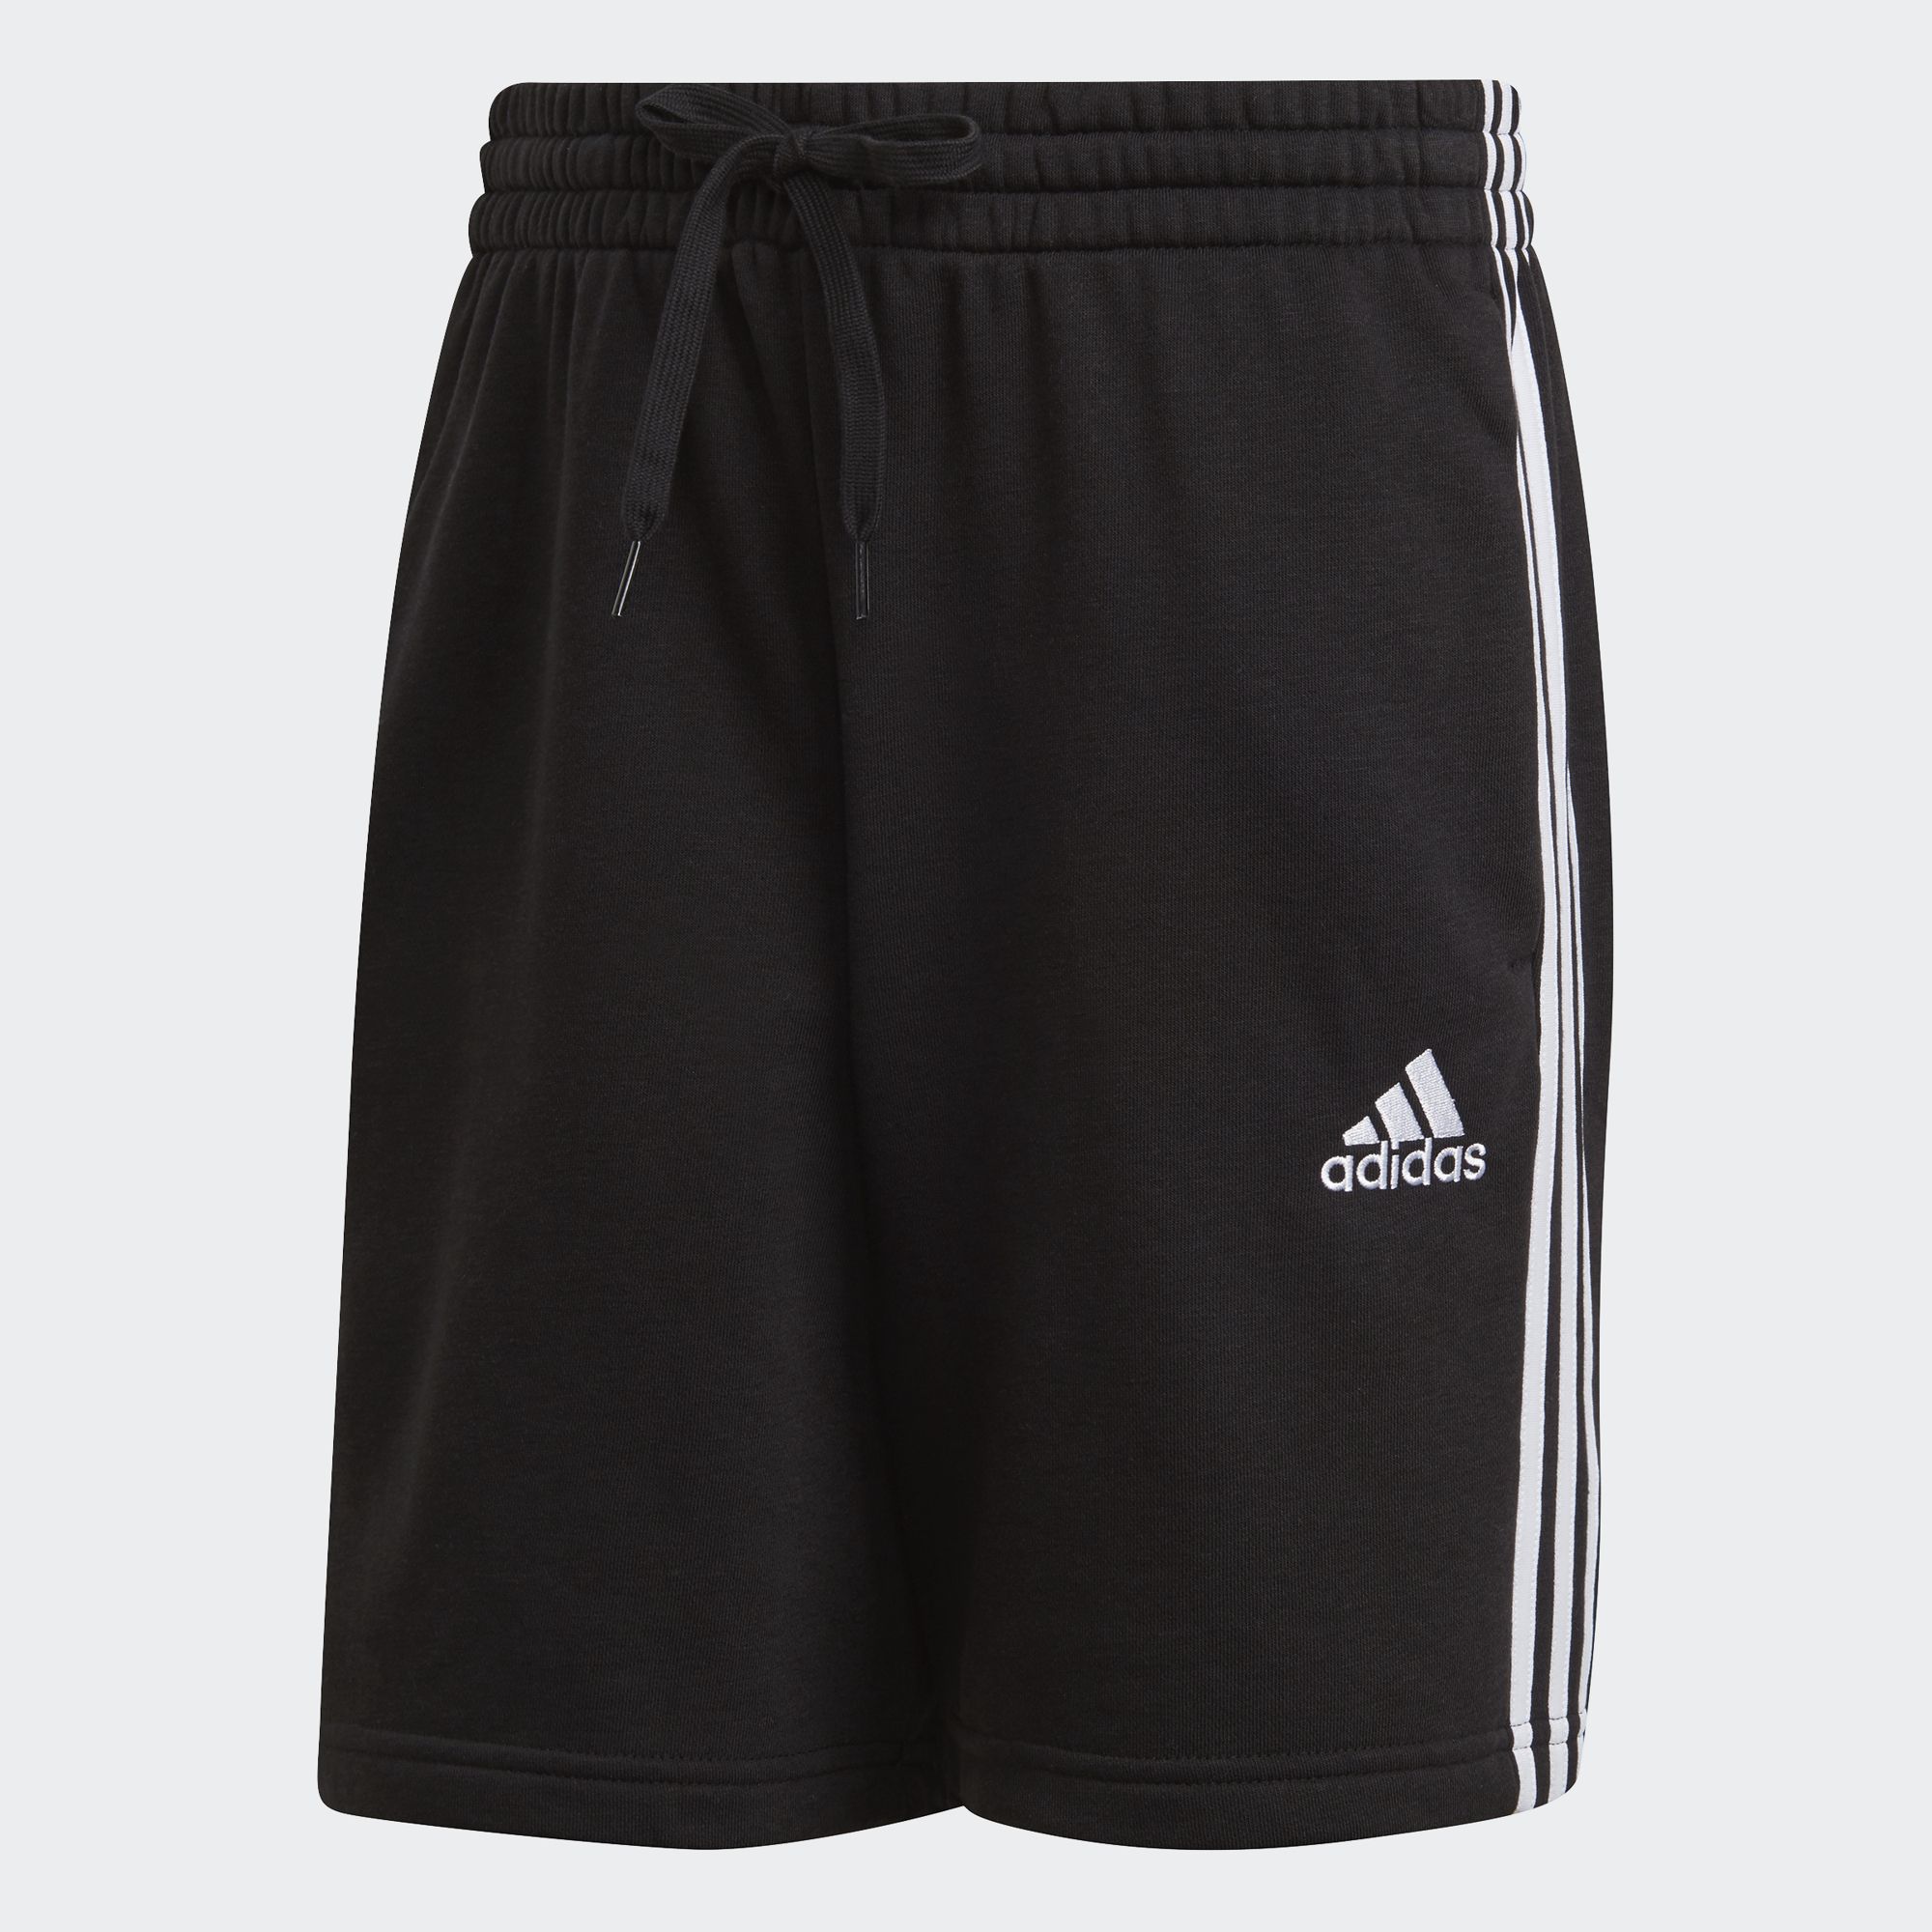 adidas NOT SPORTS SPECIFIC Essentials French Terry 3-Stripes Shorts ผู้ชาย สีดำ GK9597